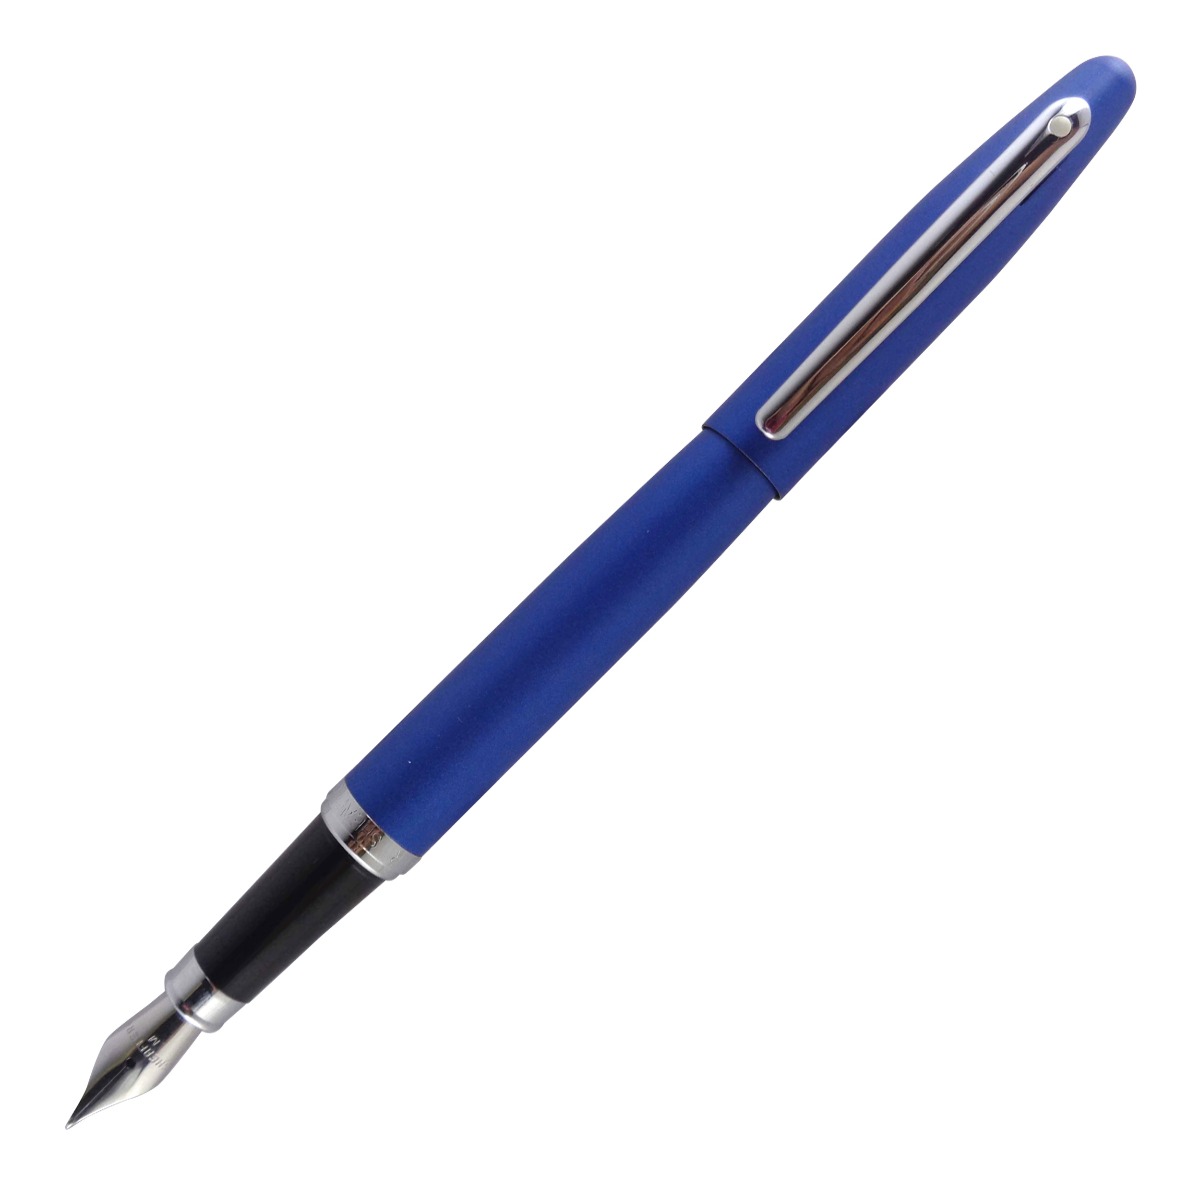 Sheaffer A9401 FP Model: 15194  Blue color mat finish body with silver clip medium tip cap type fountain pen